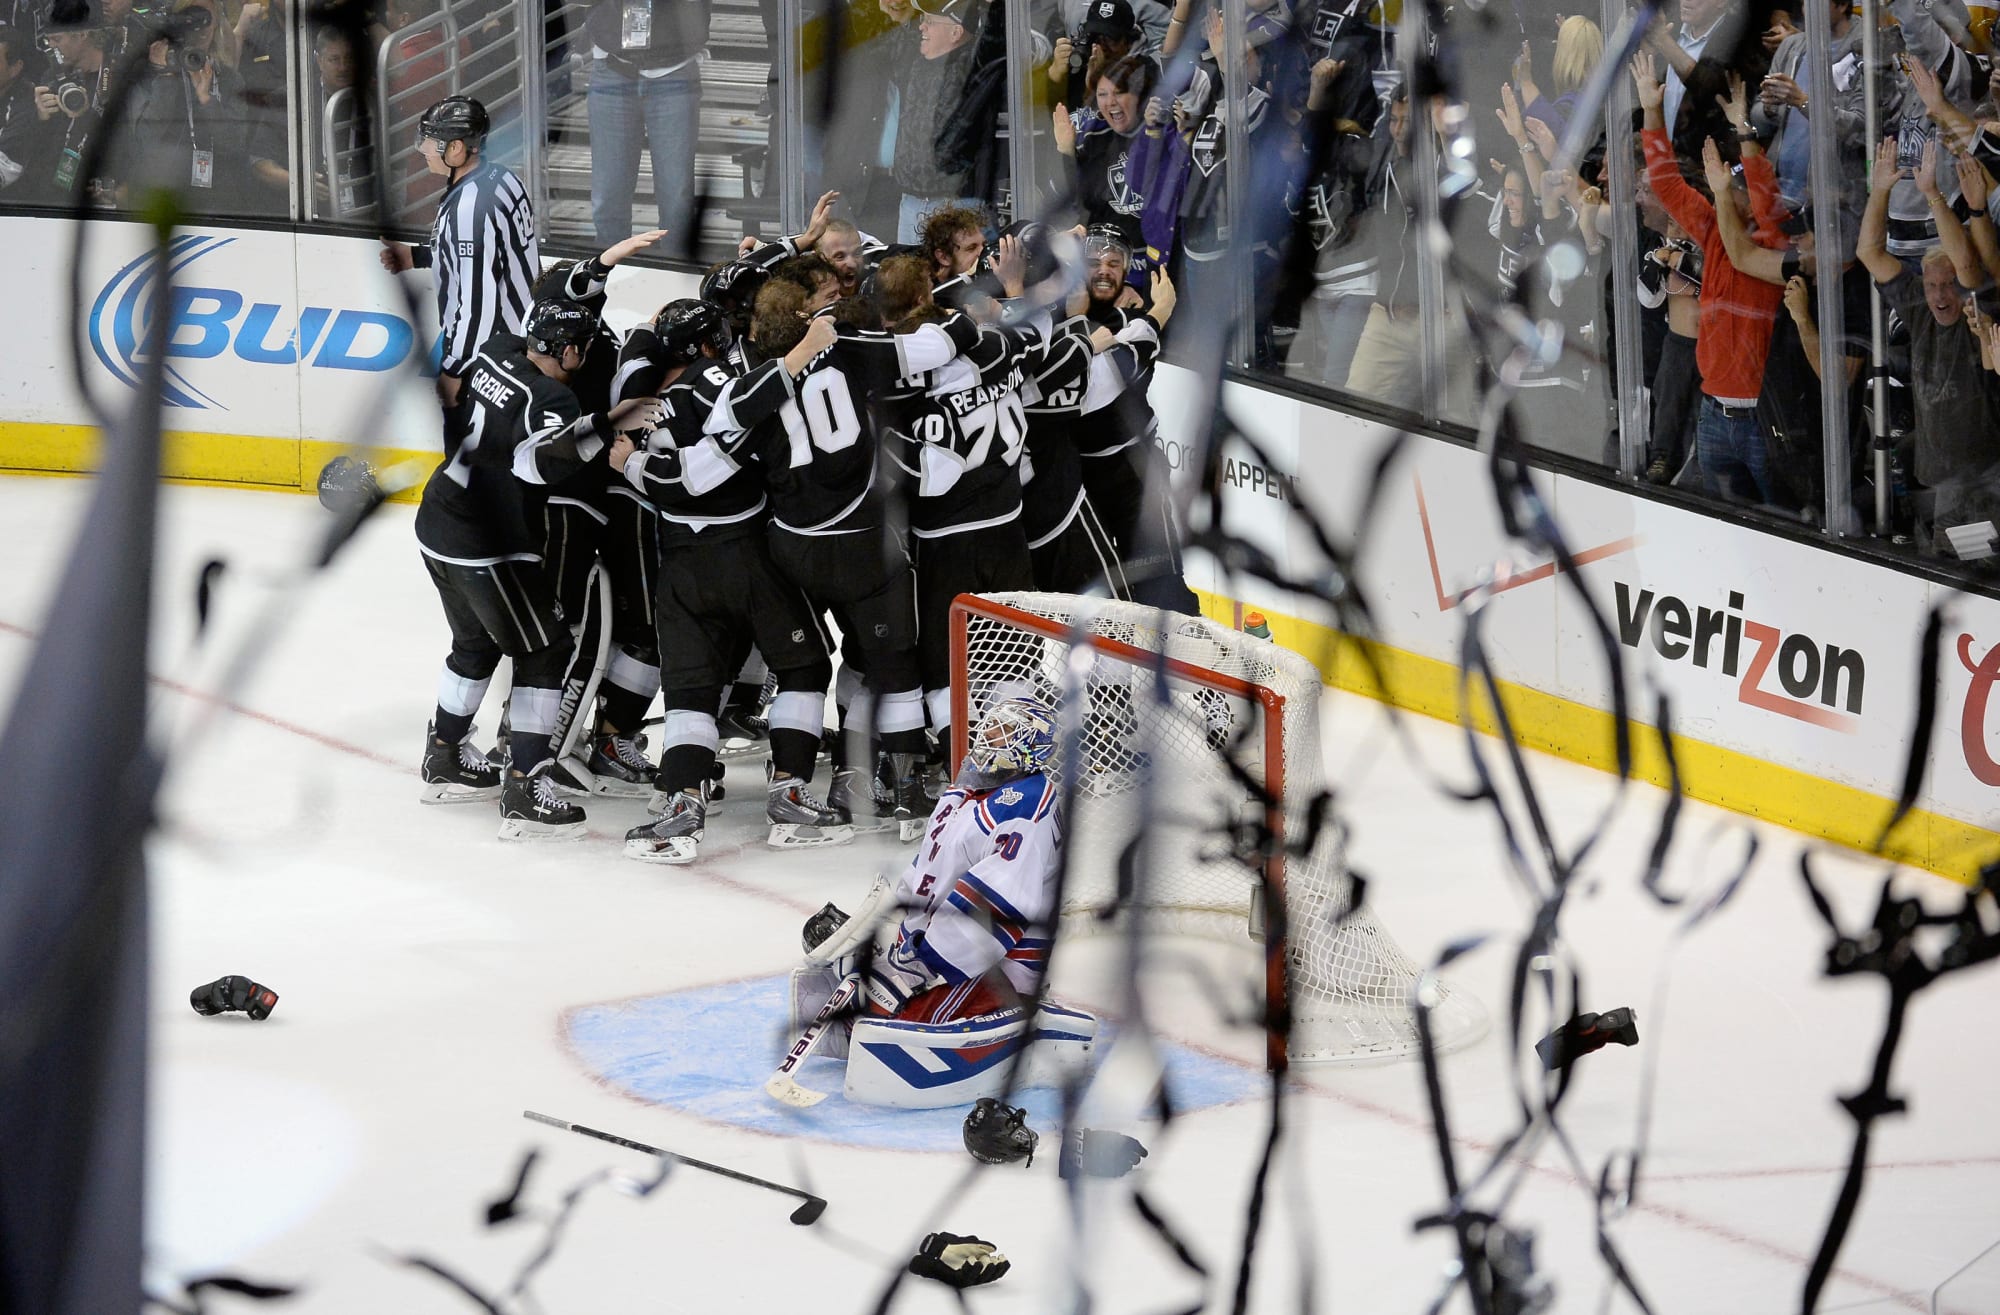 NHL: 2012 Stanley Cup Finals Game 5 - Los Angeles Kings at New